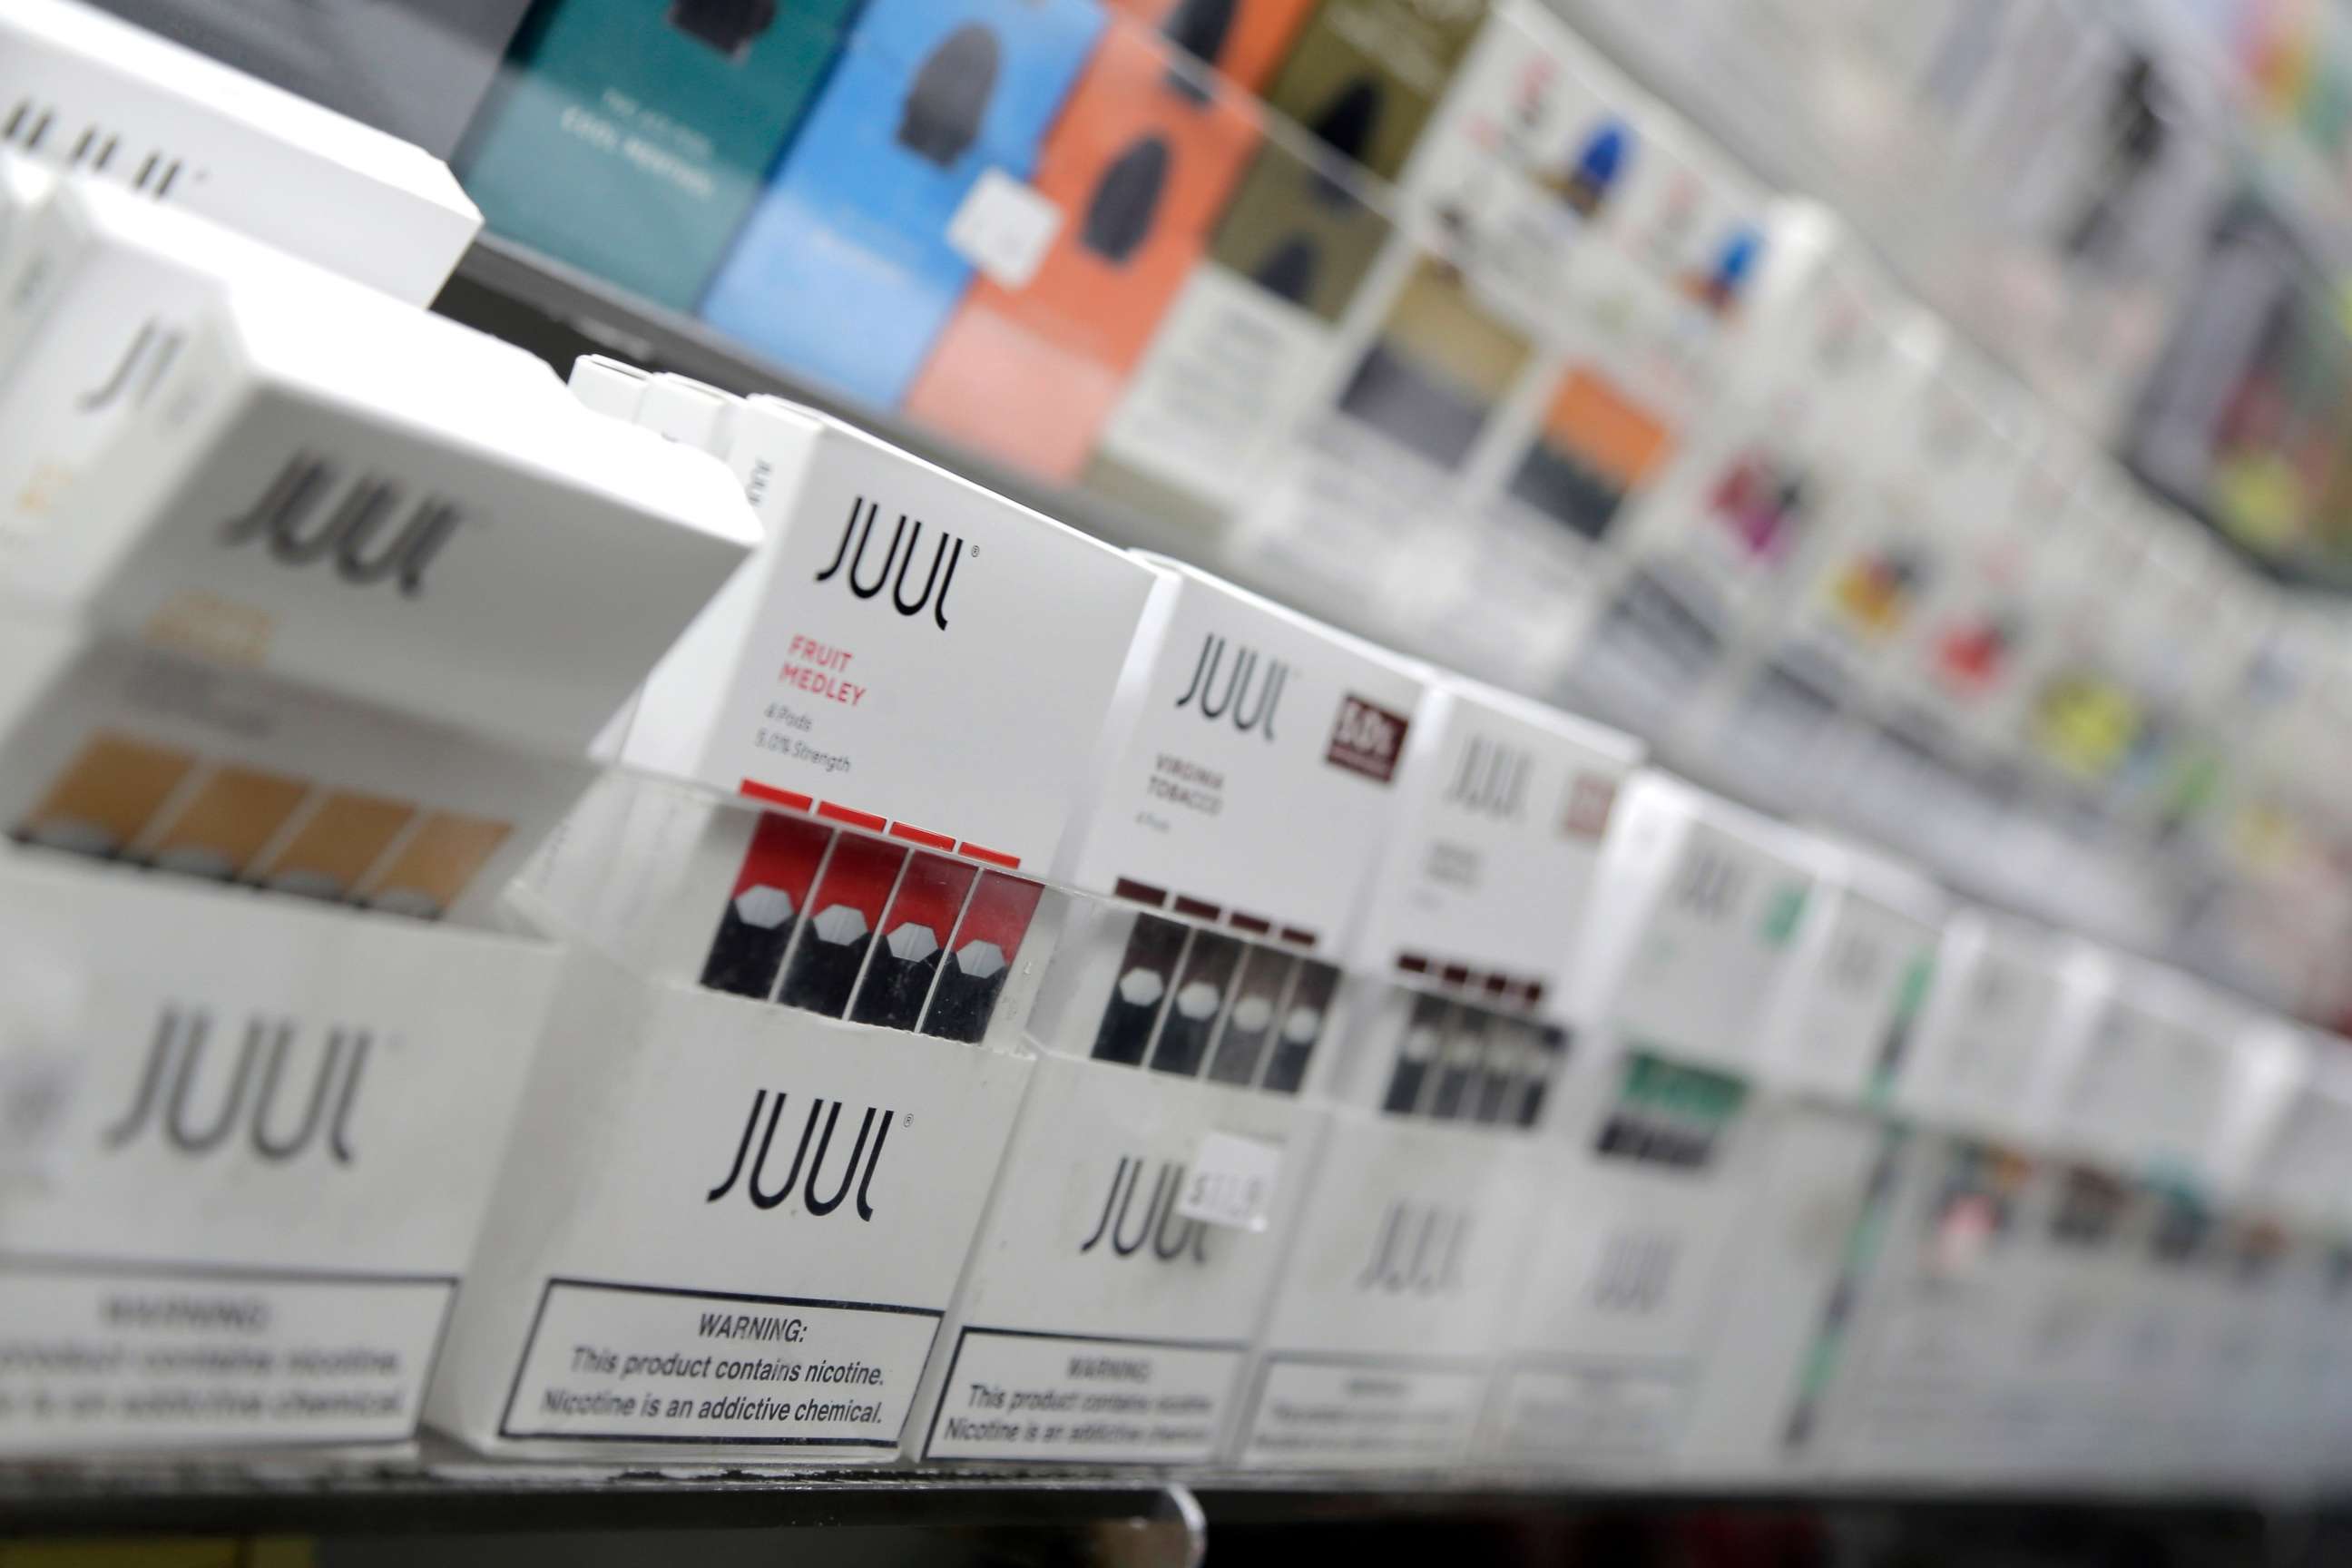 PHOTO: Juul products are displayed at a smoke shop in New York, Dec. 20, 2018.